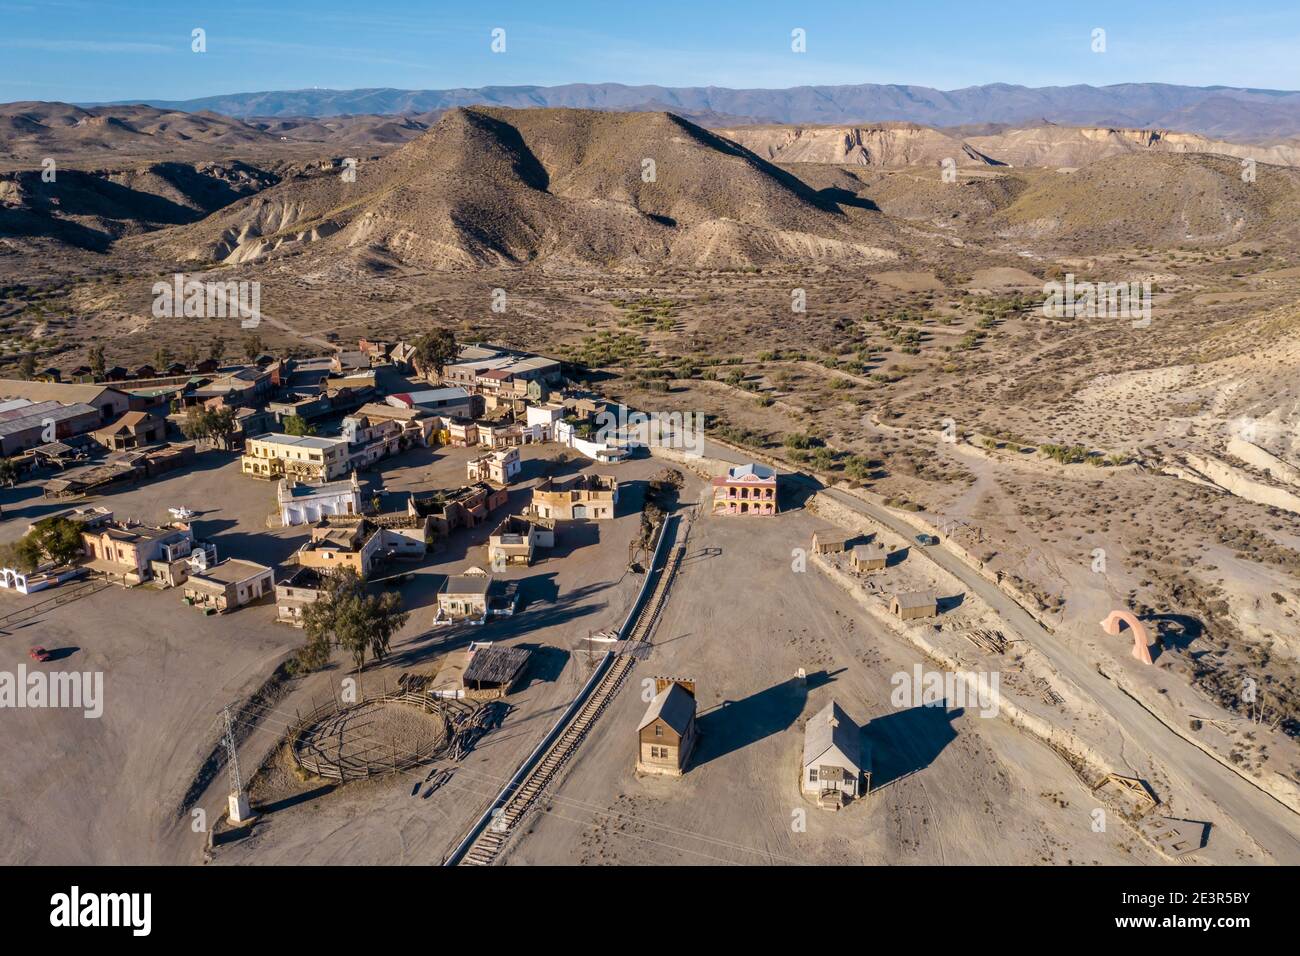 Drone above view of Tabernas Desert Landscape  Texas Hollywood Fort Bravo the western style theme park in Almeria Andalusia Spain Europe Stock Photo